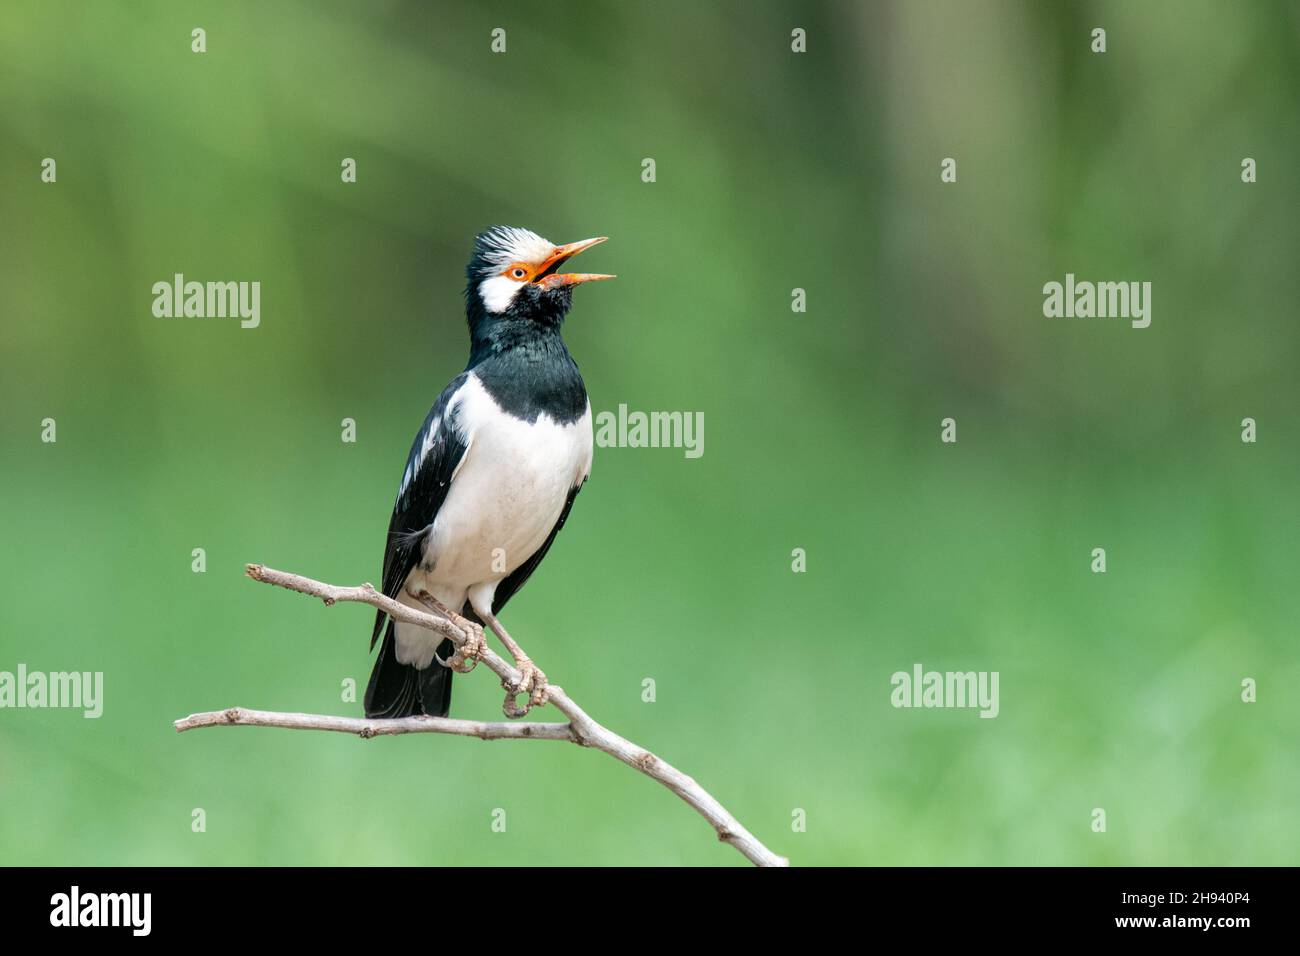 The pied myna or Asian pied starling (Gracupica contra) is a species of starling found in the Indian subcontinent and Southeast Asia. They are usually Stock Photo